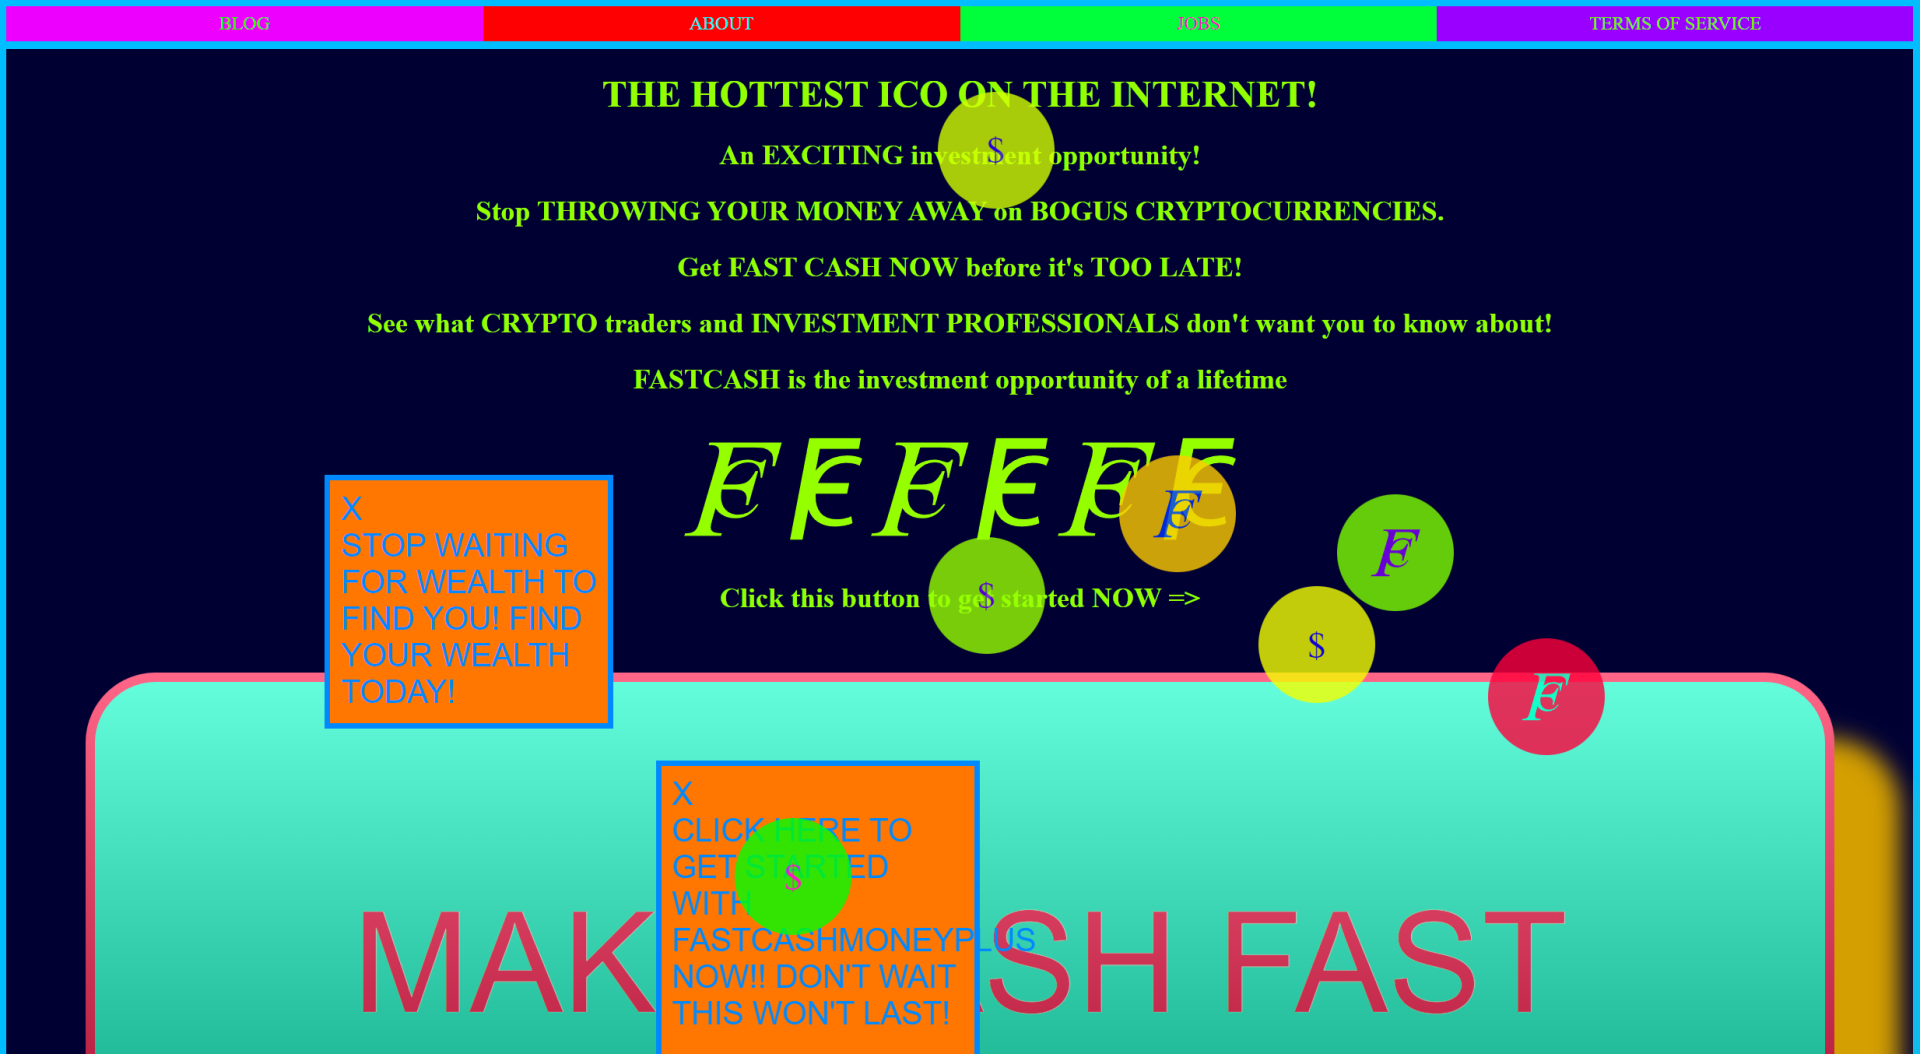 A screenshot of a website with neon text and windows advertising a get-rich-quick scheme